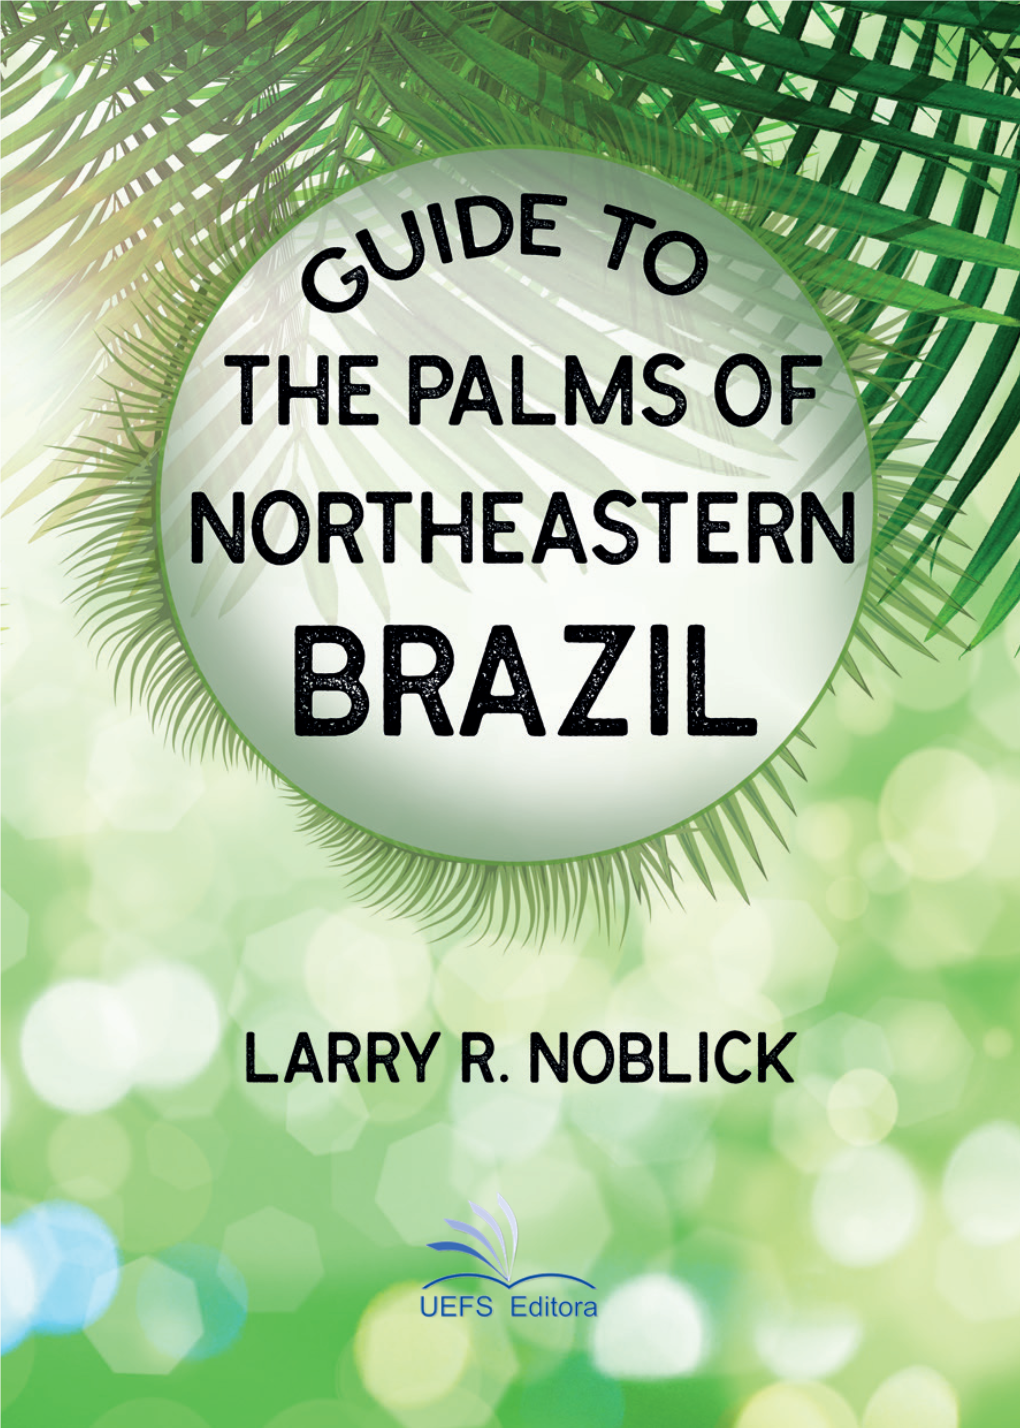 Guide-To-The-Palms-Of-Northeastern